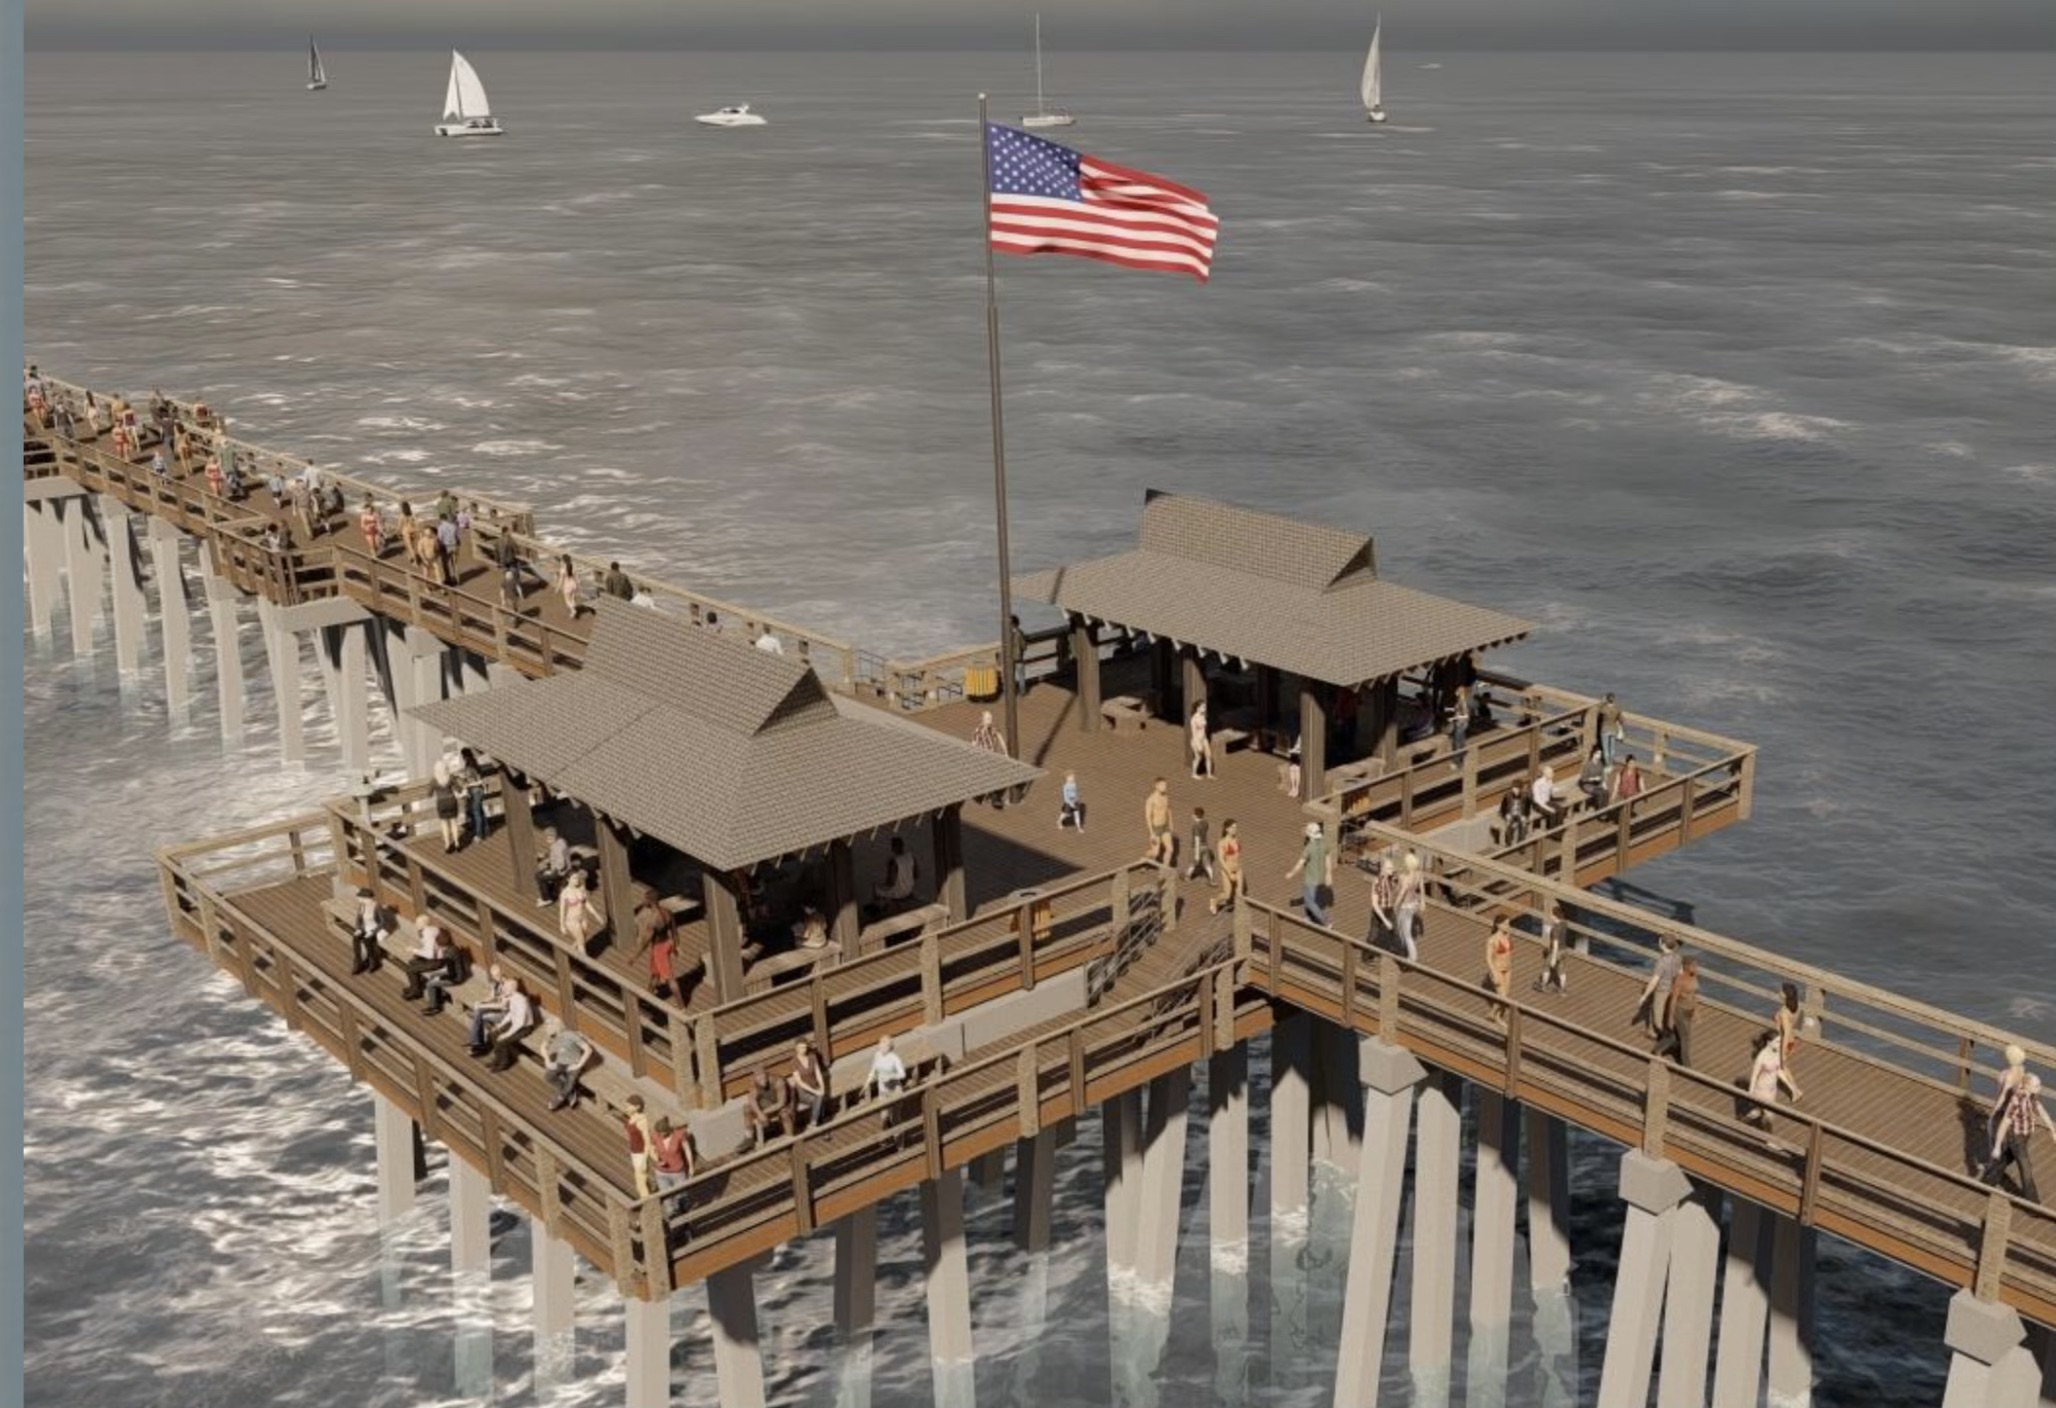 Naples Pier redesign process continues, new public survey soon available